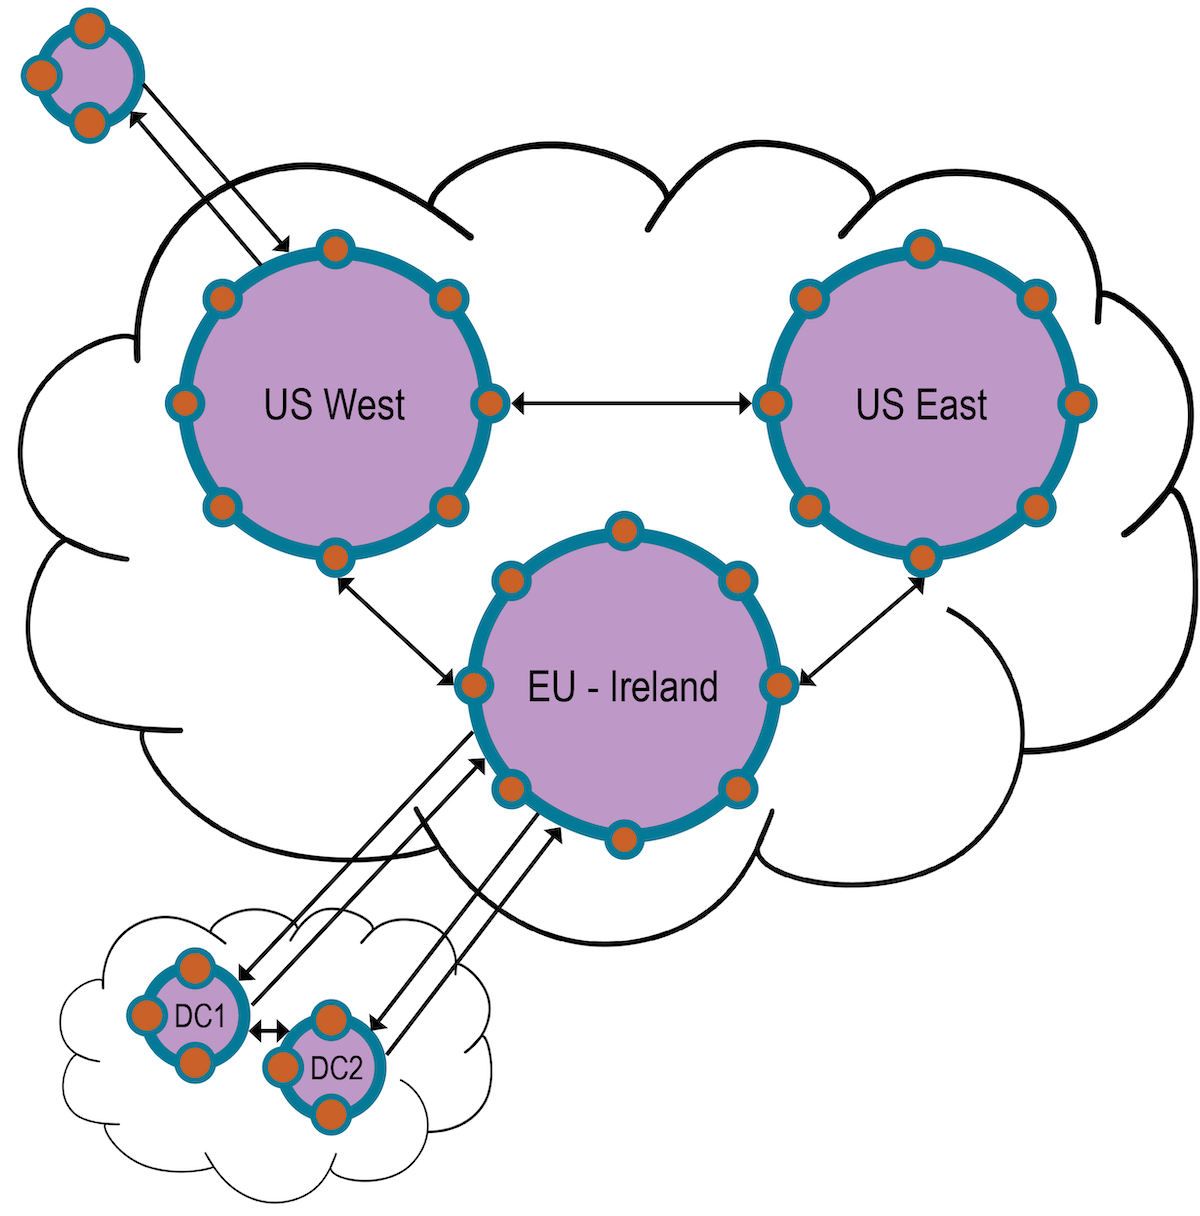 Image showing remote sensors both transmitting and receiving data to/from a centralized hub cluster.